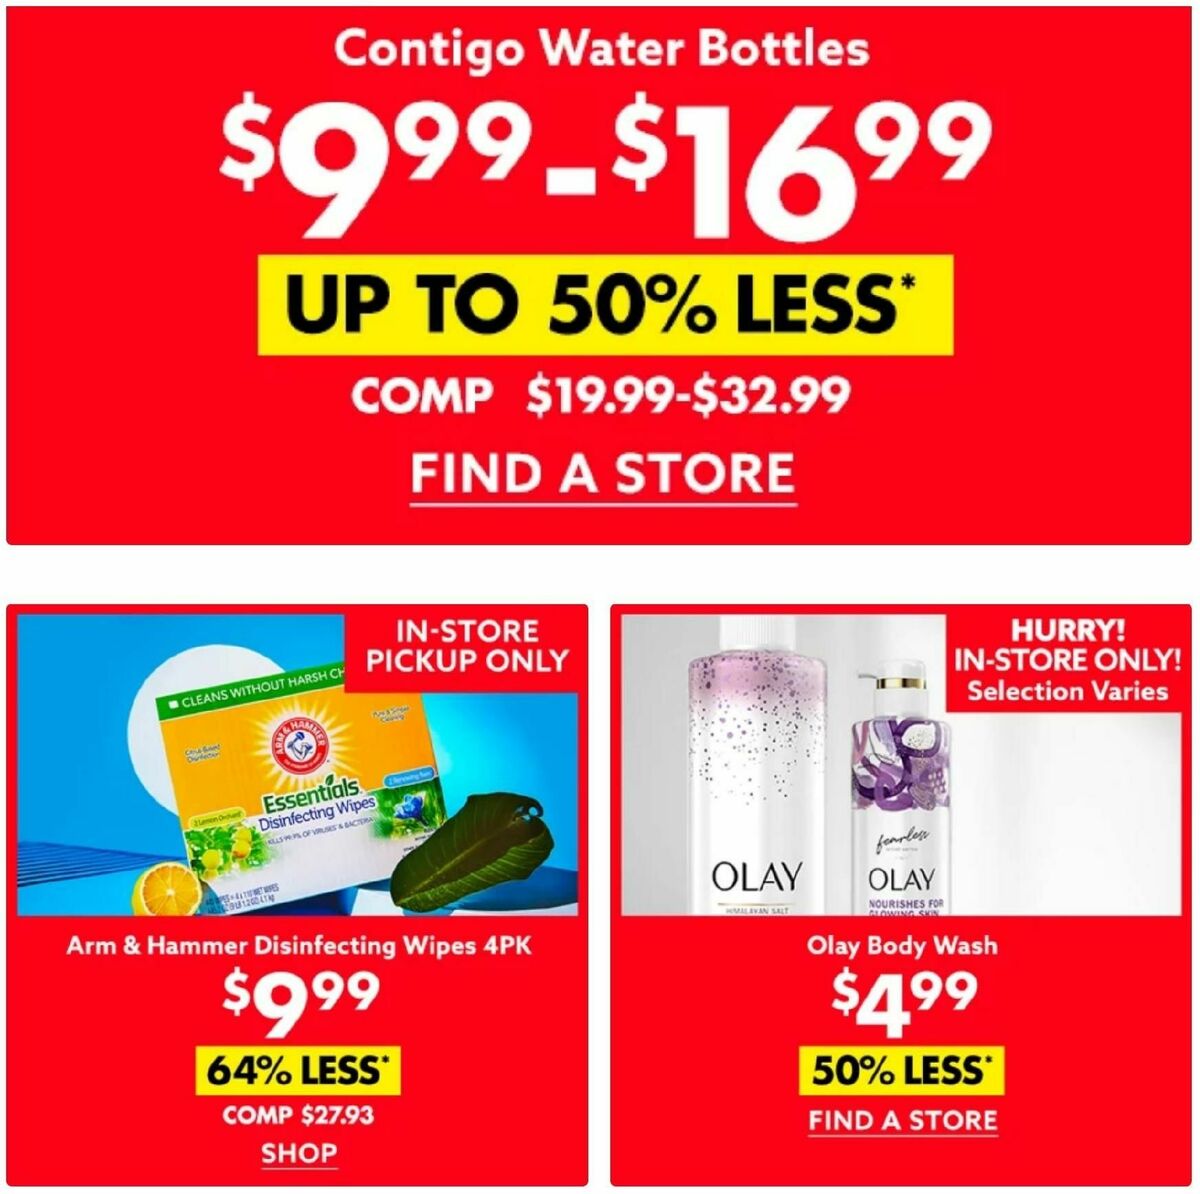 Big Lots Weekly Ad from June 21